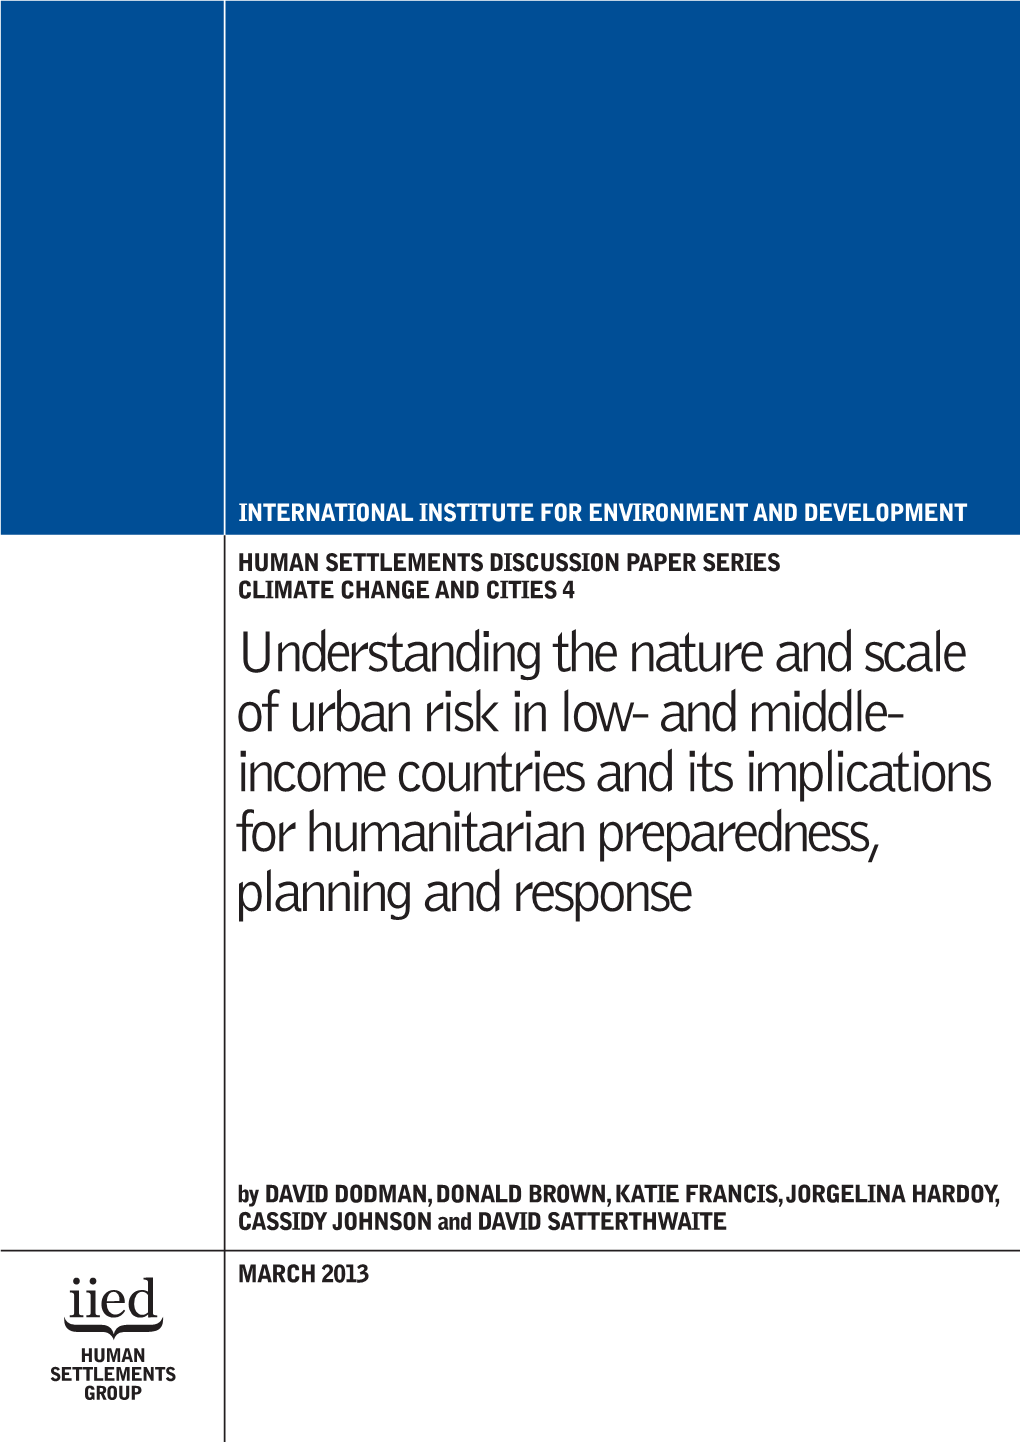 Understanding the Nature and Scale of Urban Risk in Low- and Middle- Income Countries and Its Implications for Humanitarian Preparedness, Planning and Response